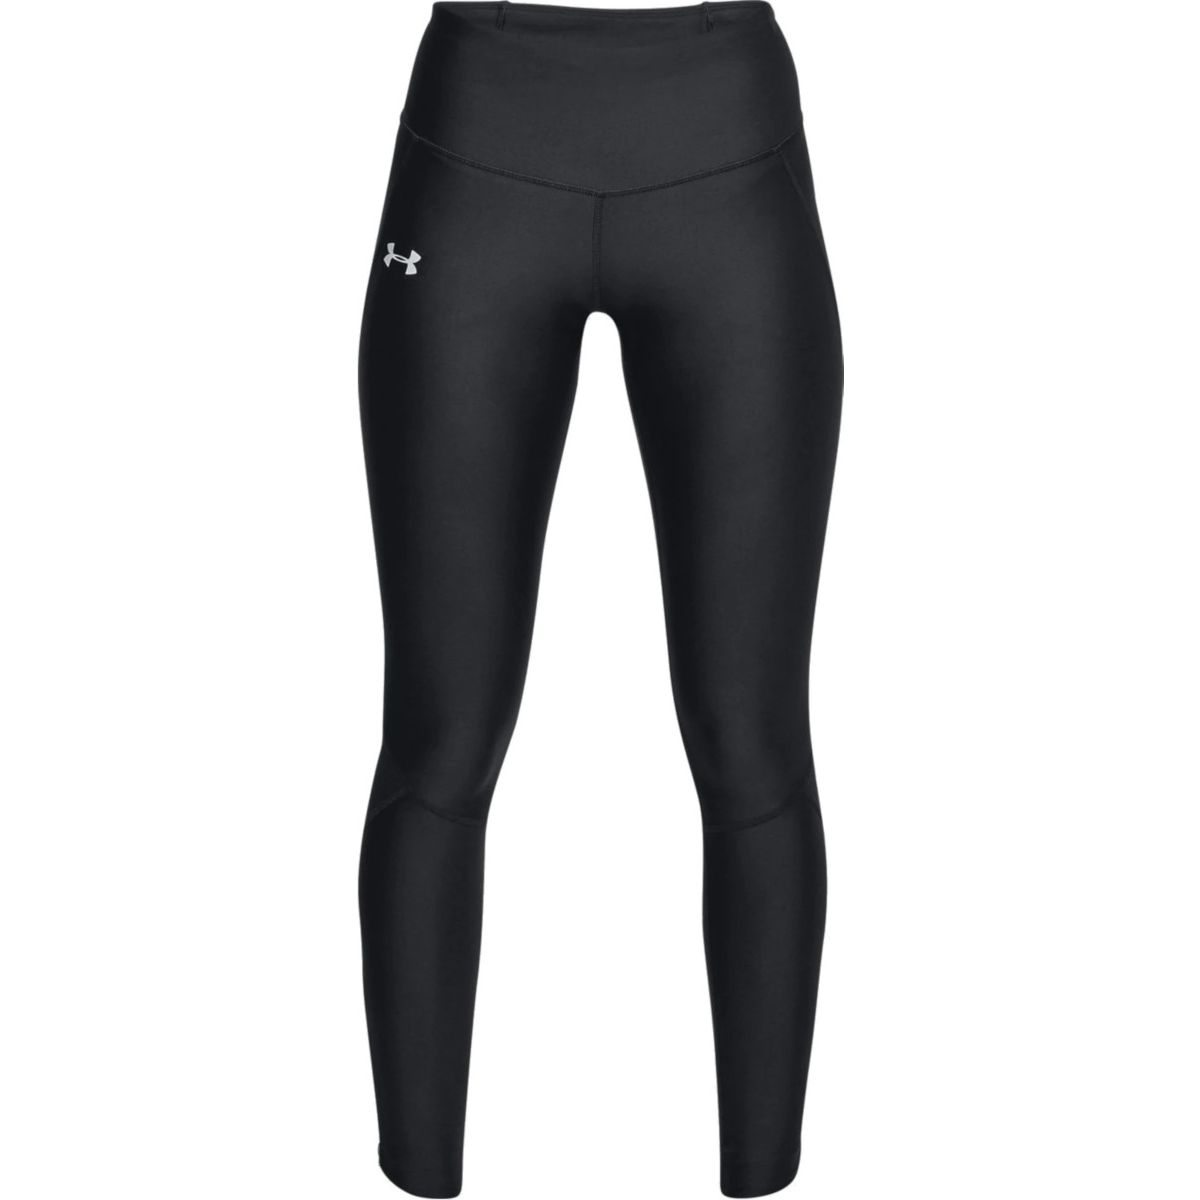 Under Armour Fly Fast Women's Tights 1320322-001